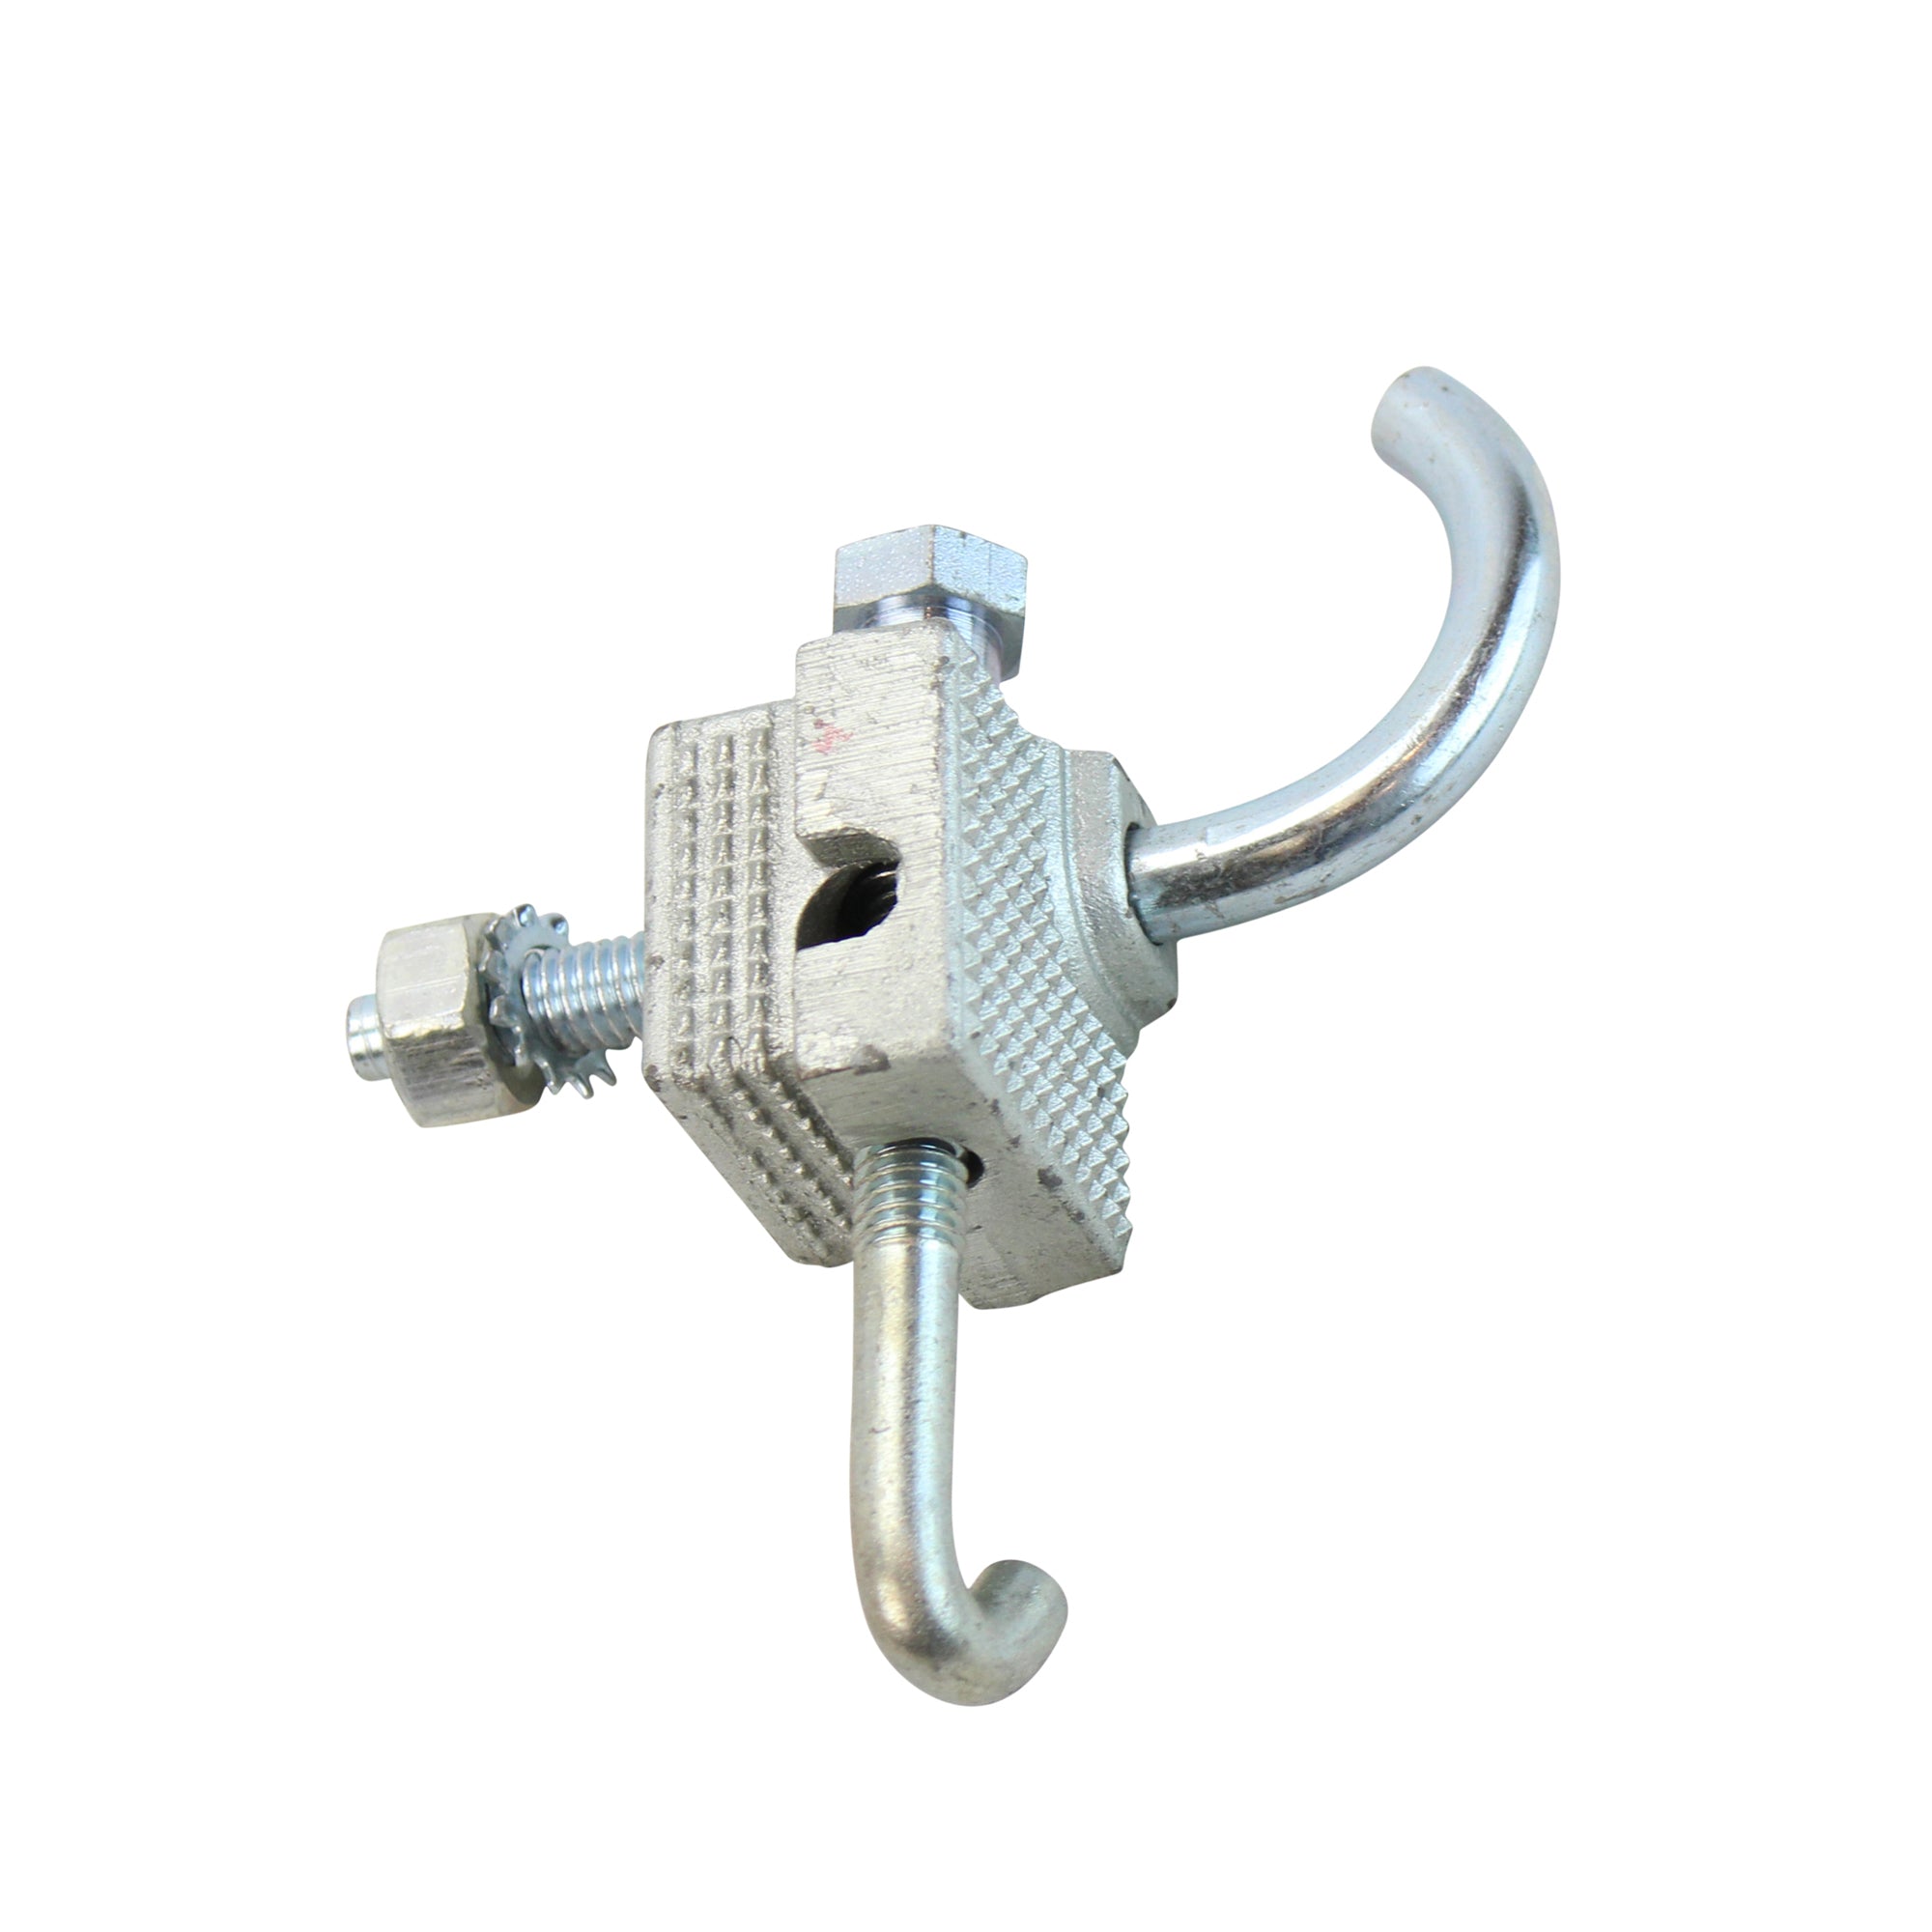 Crouse Hinds, COOPER CROUSE-HINDS LCCF4 CABLE TRAY CONDIT CLAMP INSIDE RAIL, CAST IRON, 1-1/4"